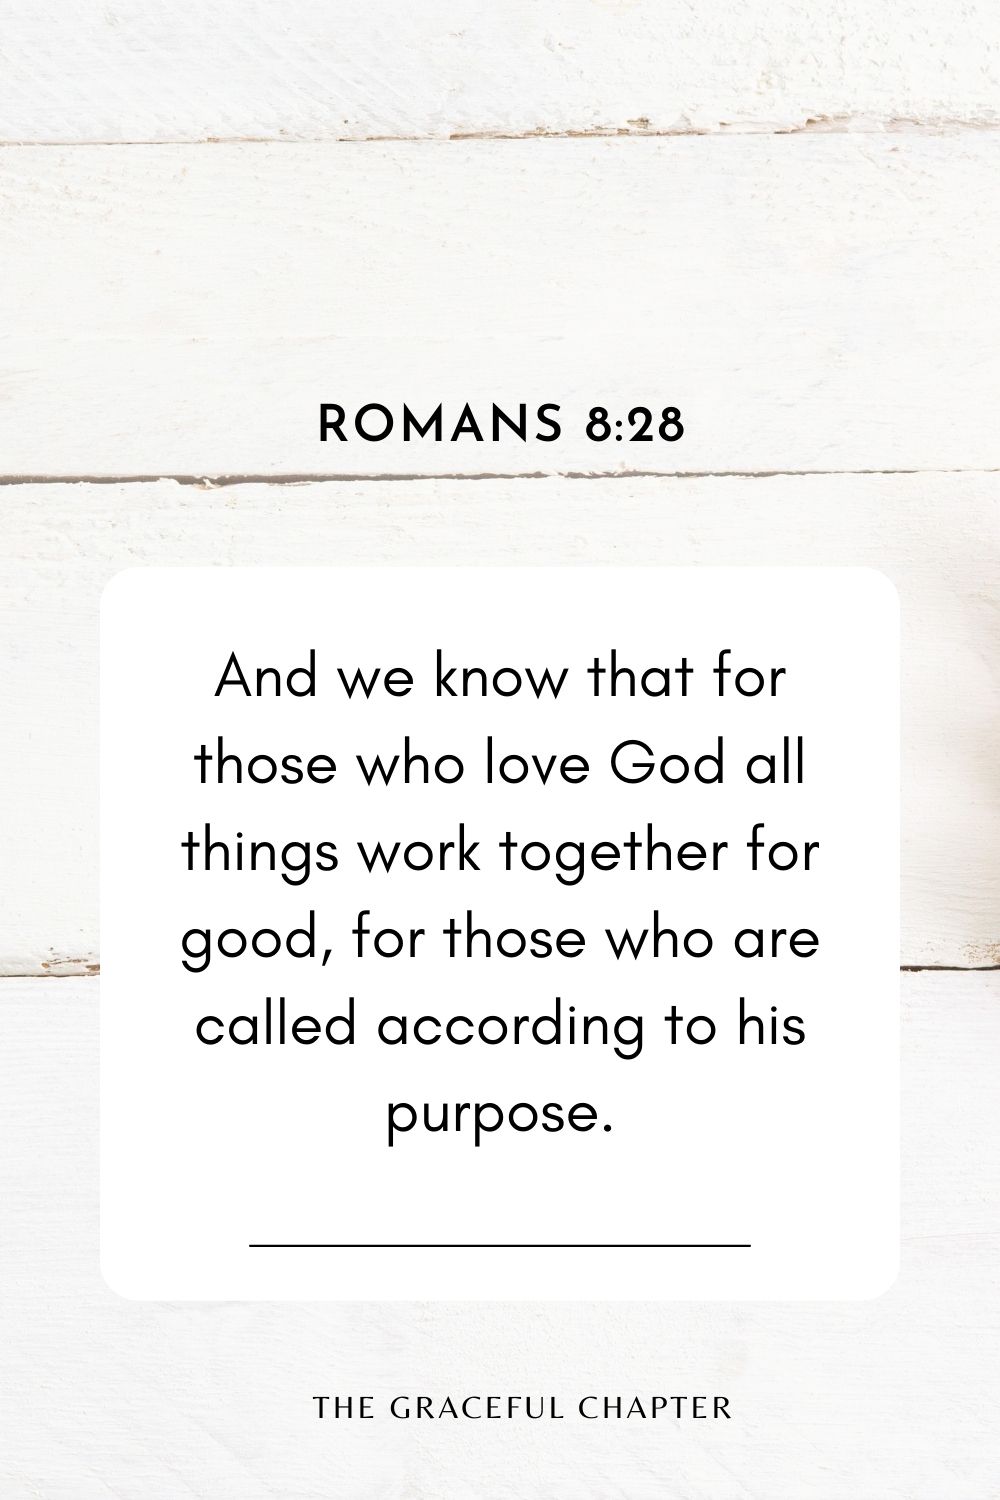 And we know that for those who love God all things work together for good, for those who are called according to his purpose. Romans 8:28